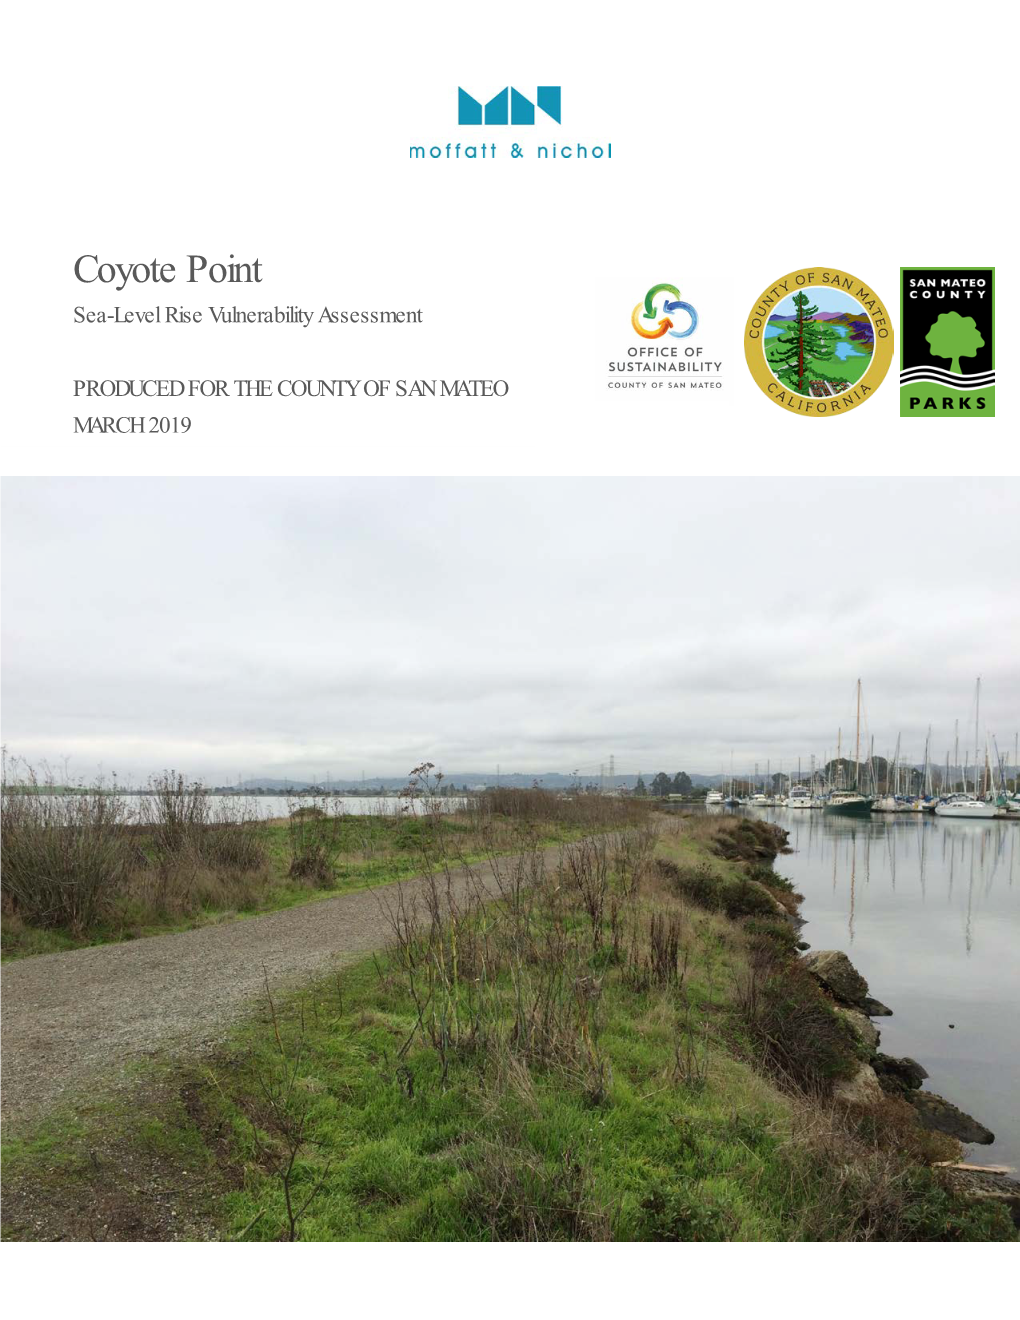 Coyote Point Sea-Level Rise Vulnerability Assessment